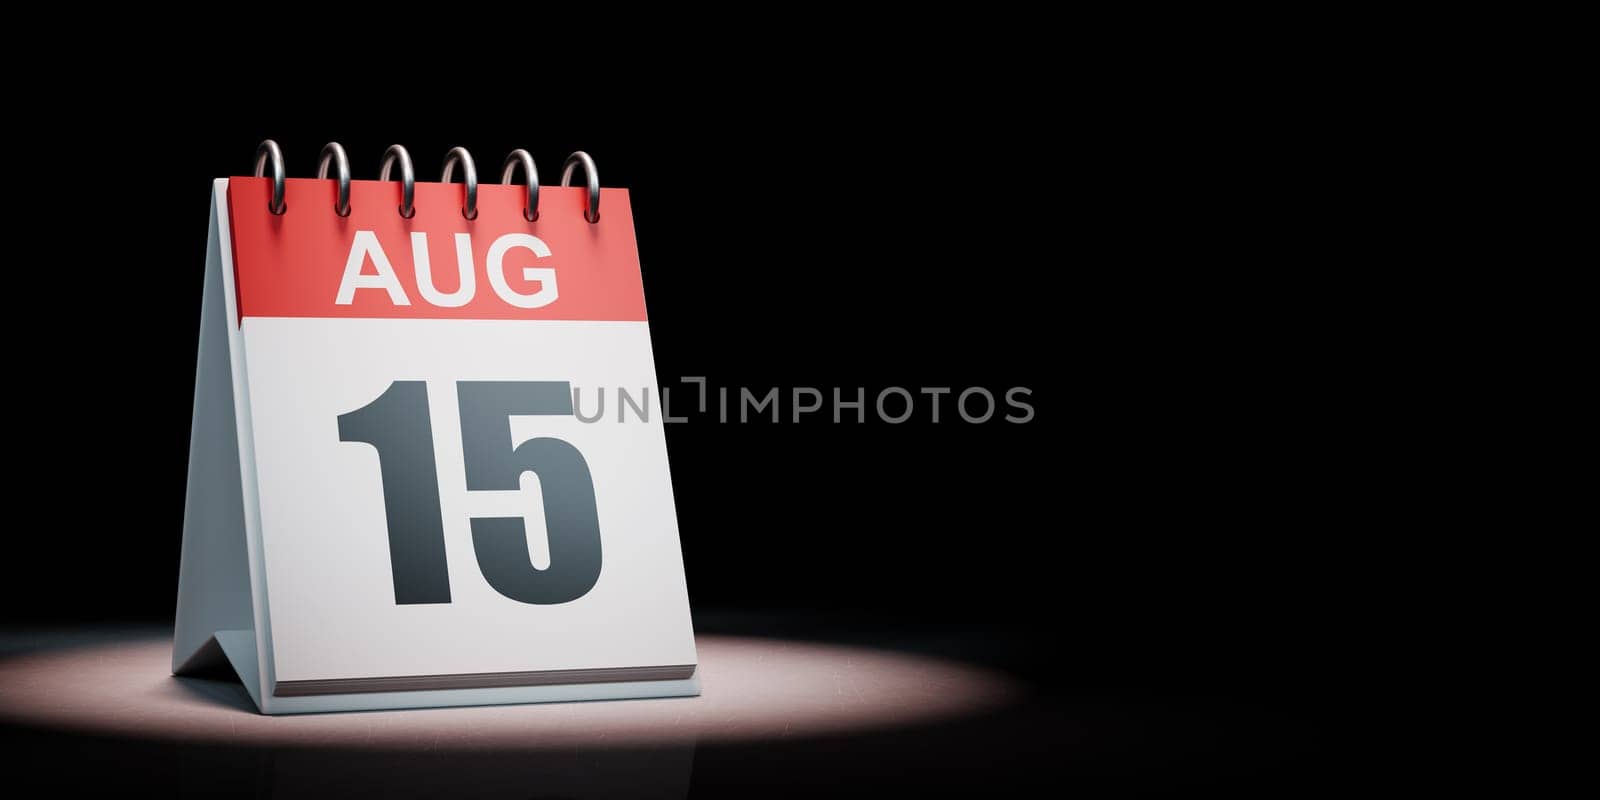 Red and White August 15 Desk Calendar Spotlighted on Black Background with Copy Space 3D Illustration